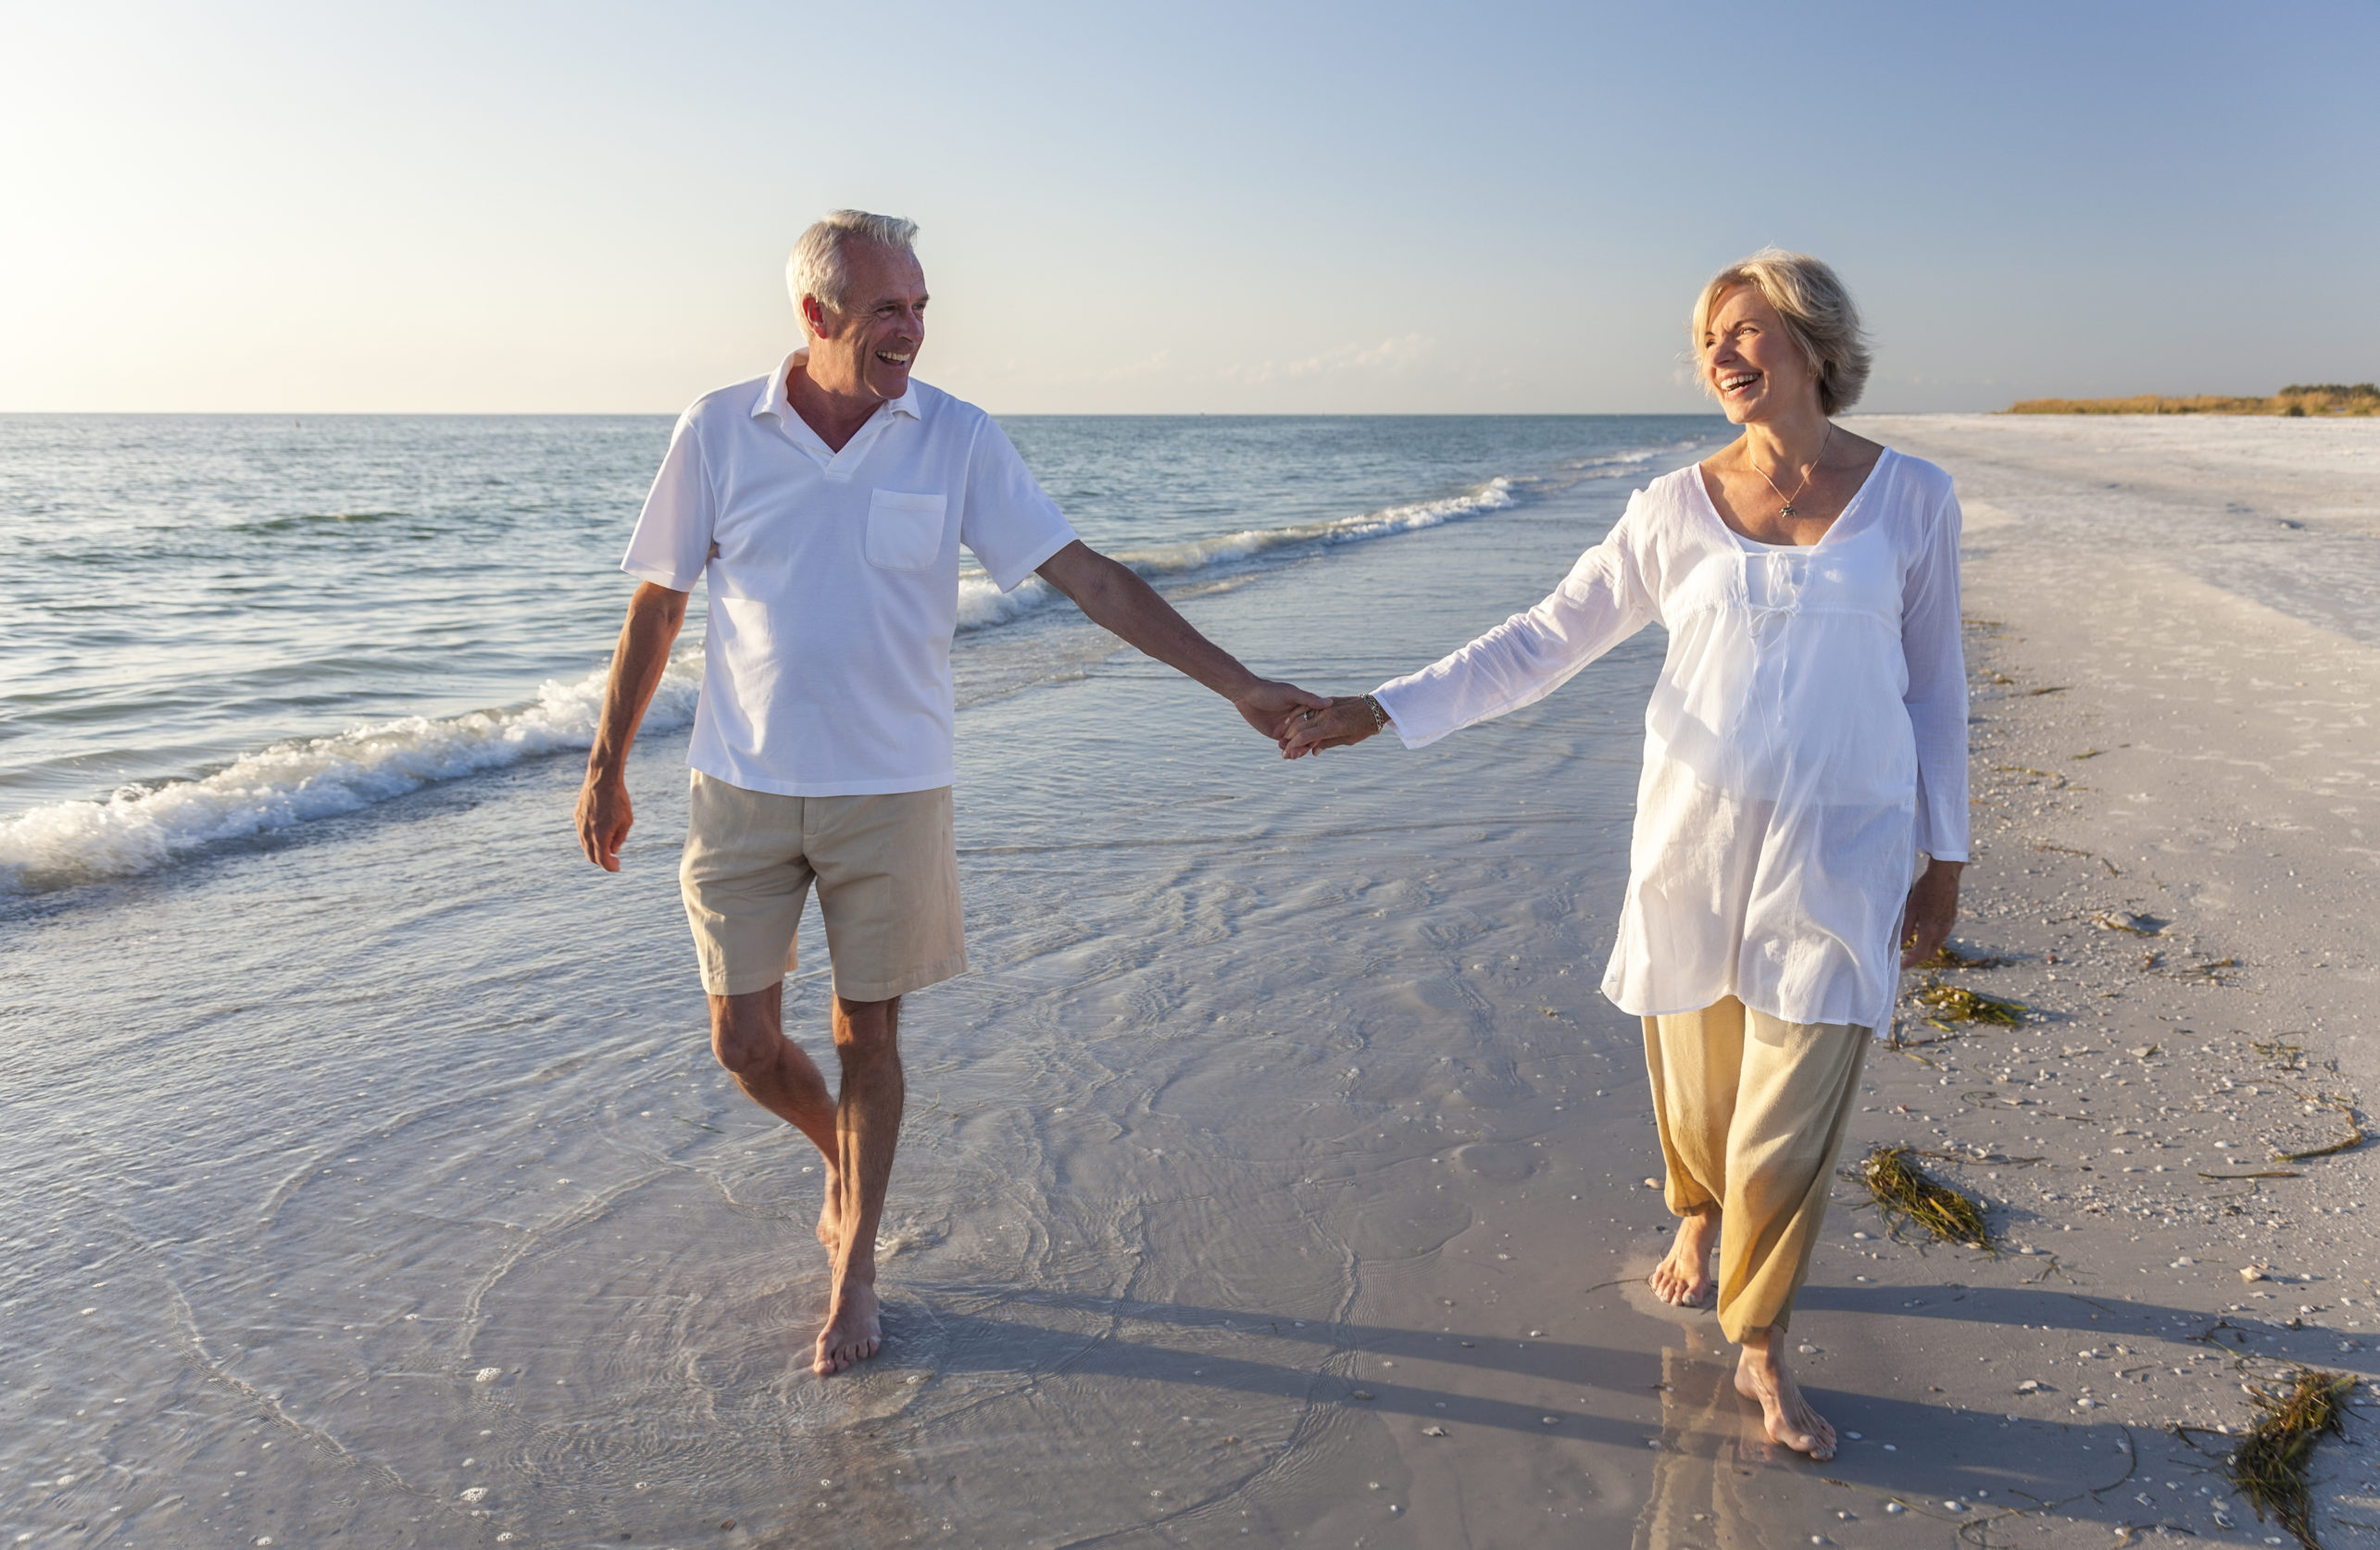 Ages 61-63 and Life Insurance rates